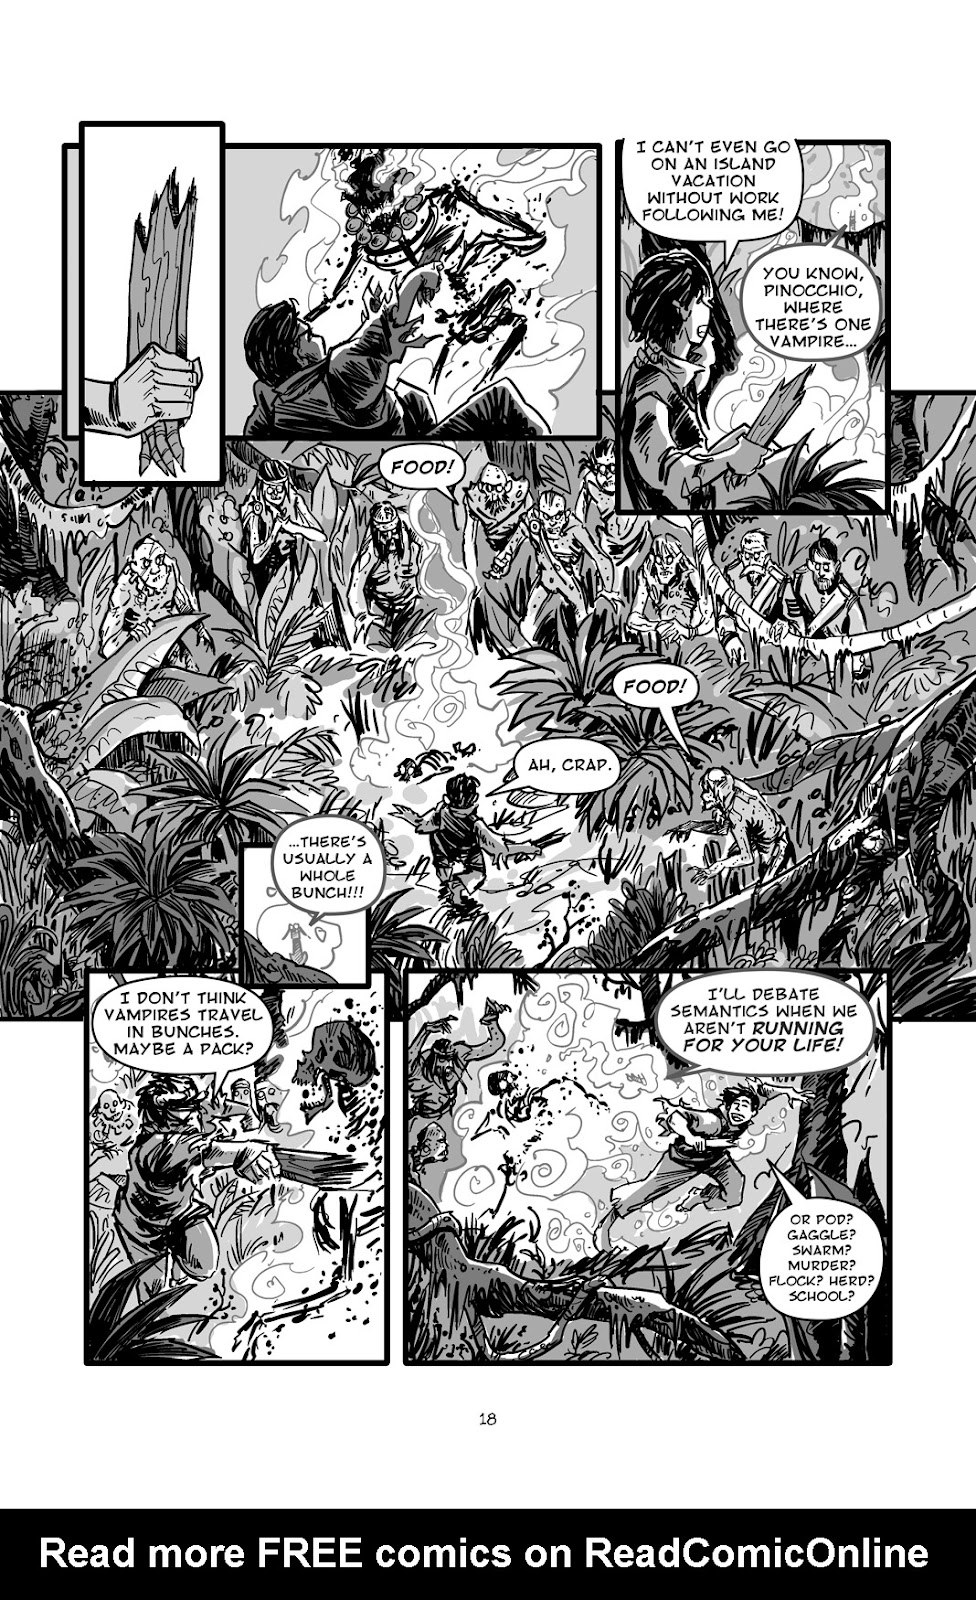 Pinocchio: Vampire Slayer - Of Wood and Blood issue 1 - Page 19